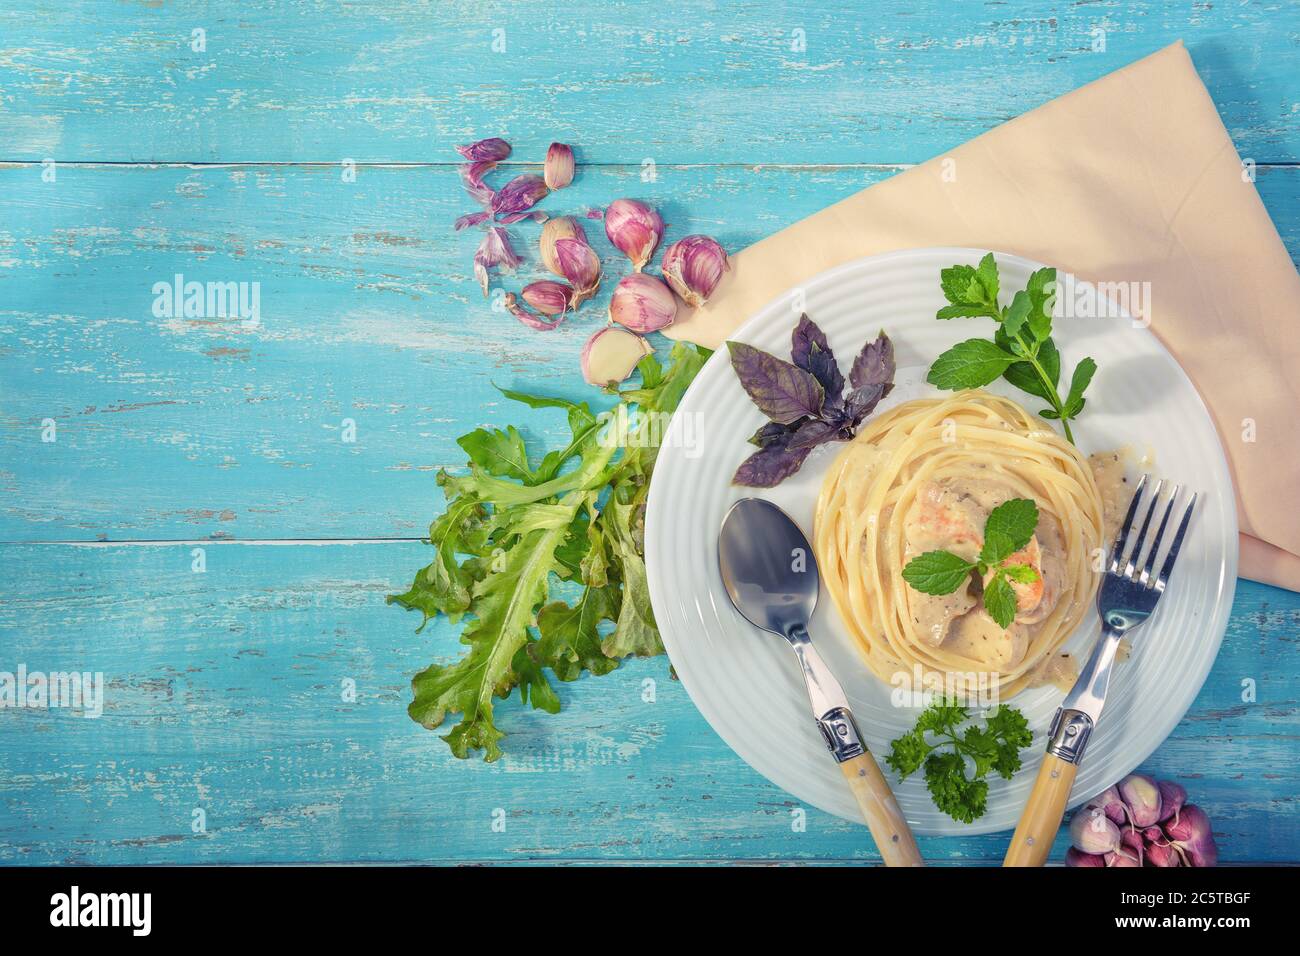 Dish standing on a blue wooden table, a plate with Italian pasta and chicken with a sauce of Provencal herbs, decorated with herbs, salt and garlic. Stock Photo